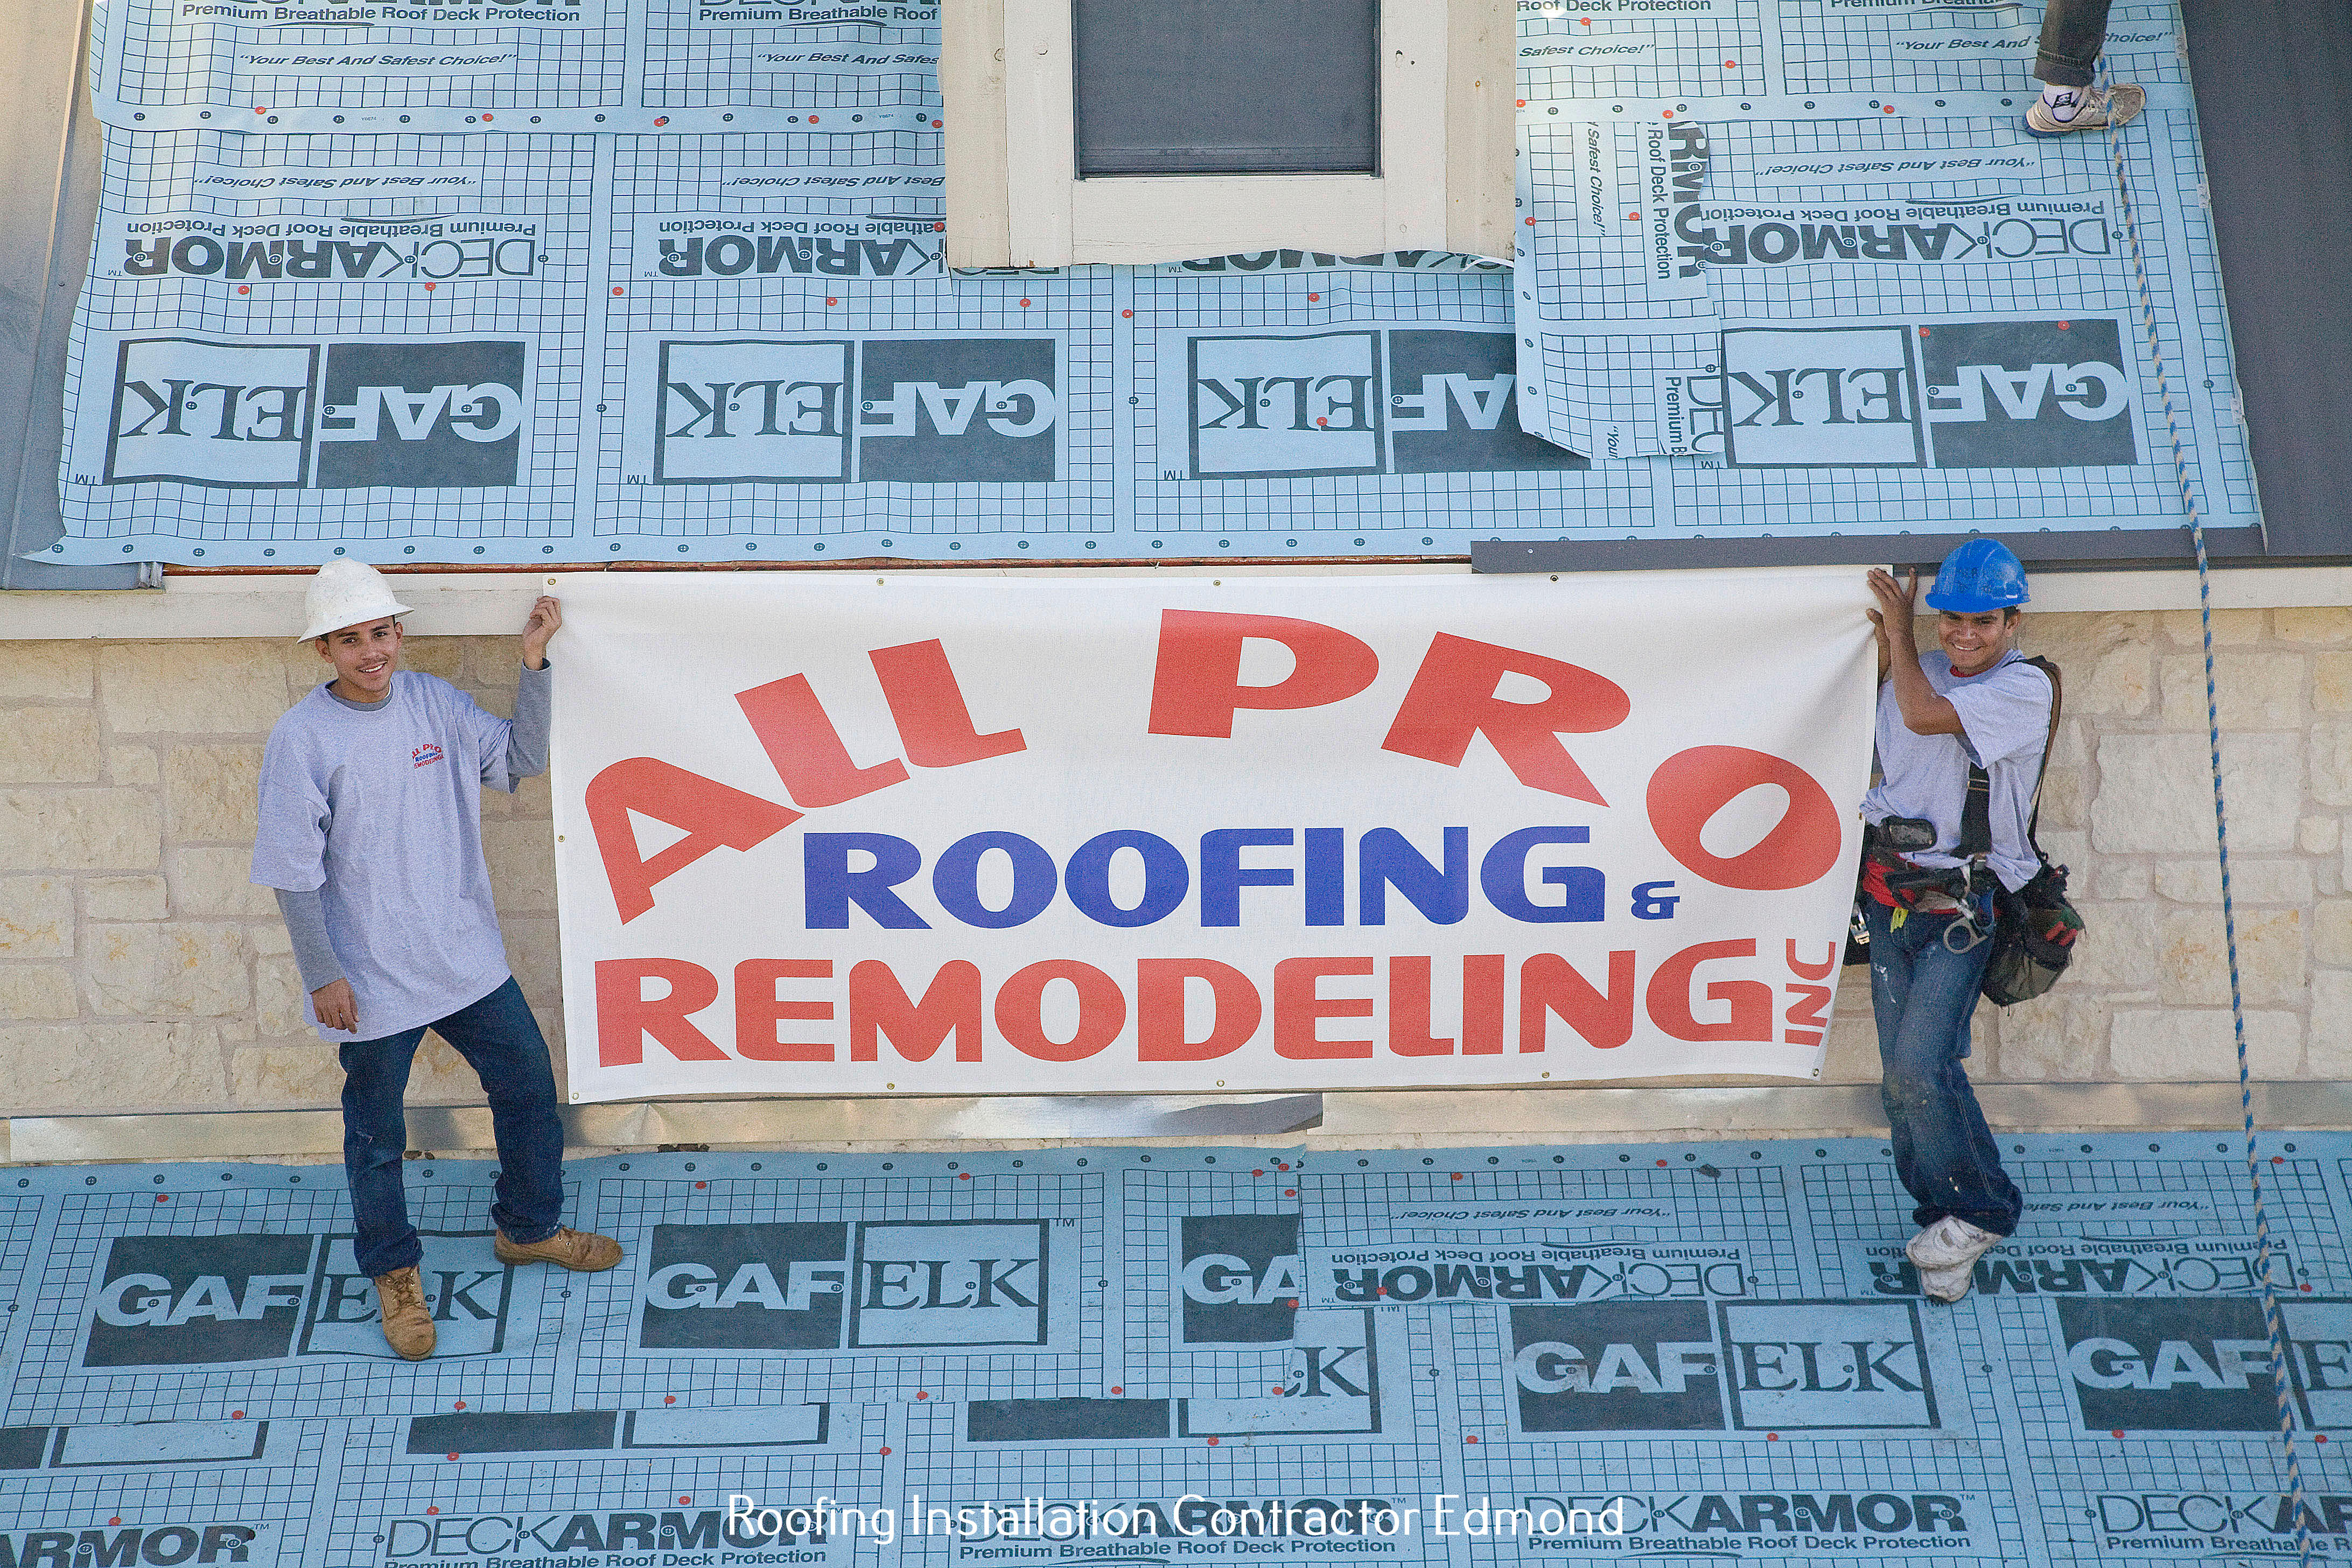 All Pro Roofing & Remodeling Highlights Energy Efficiency Options in New Roof Installation